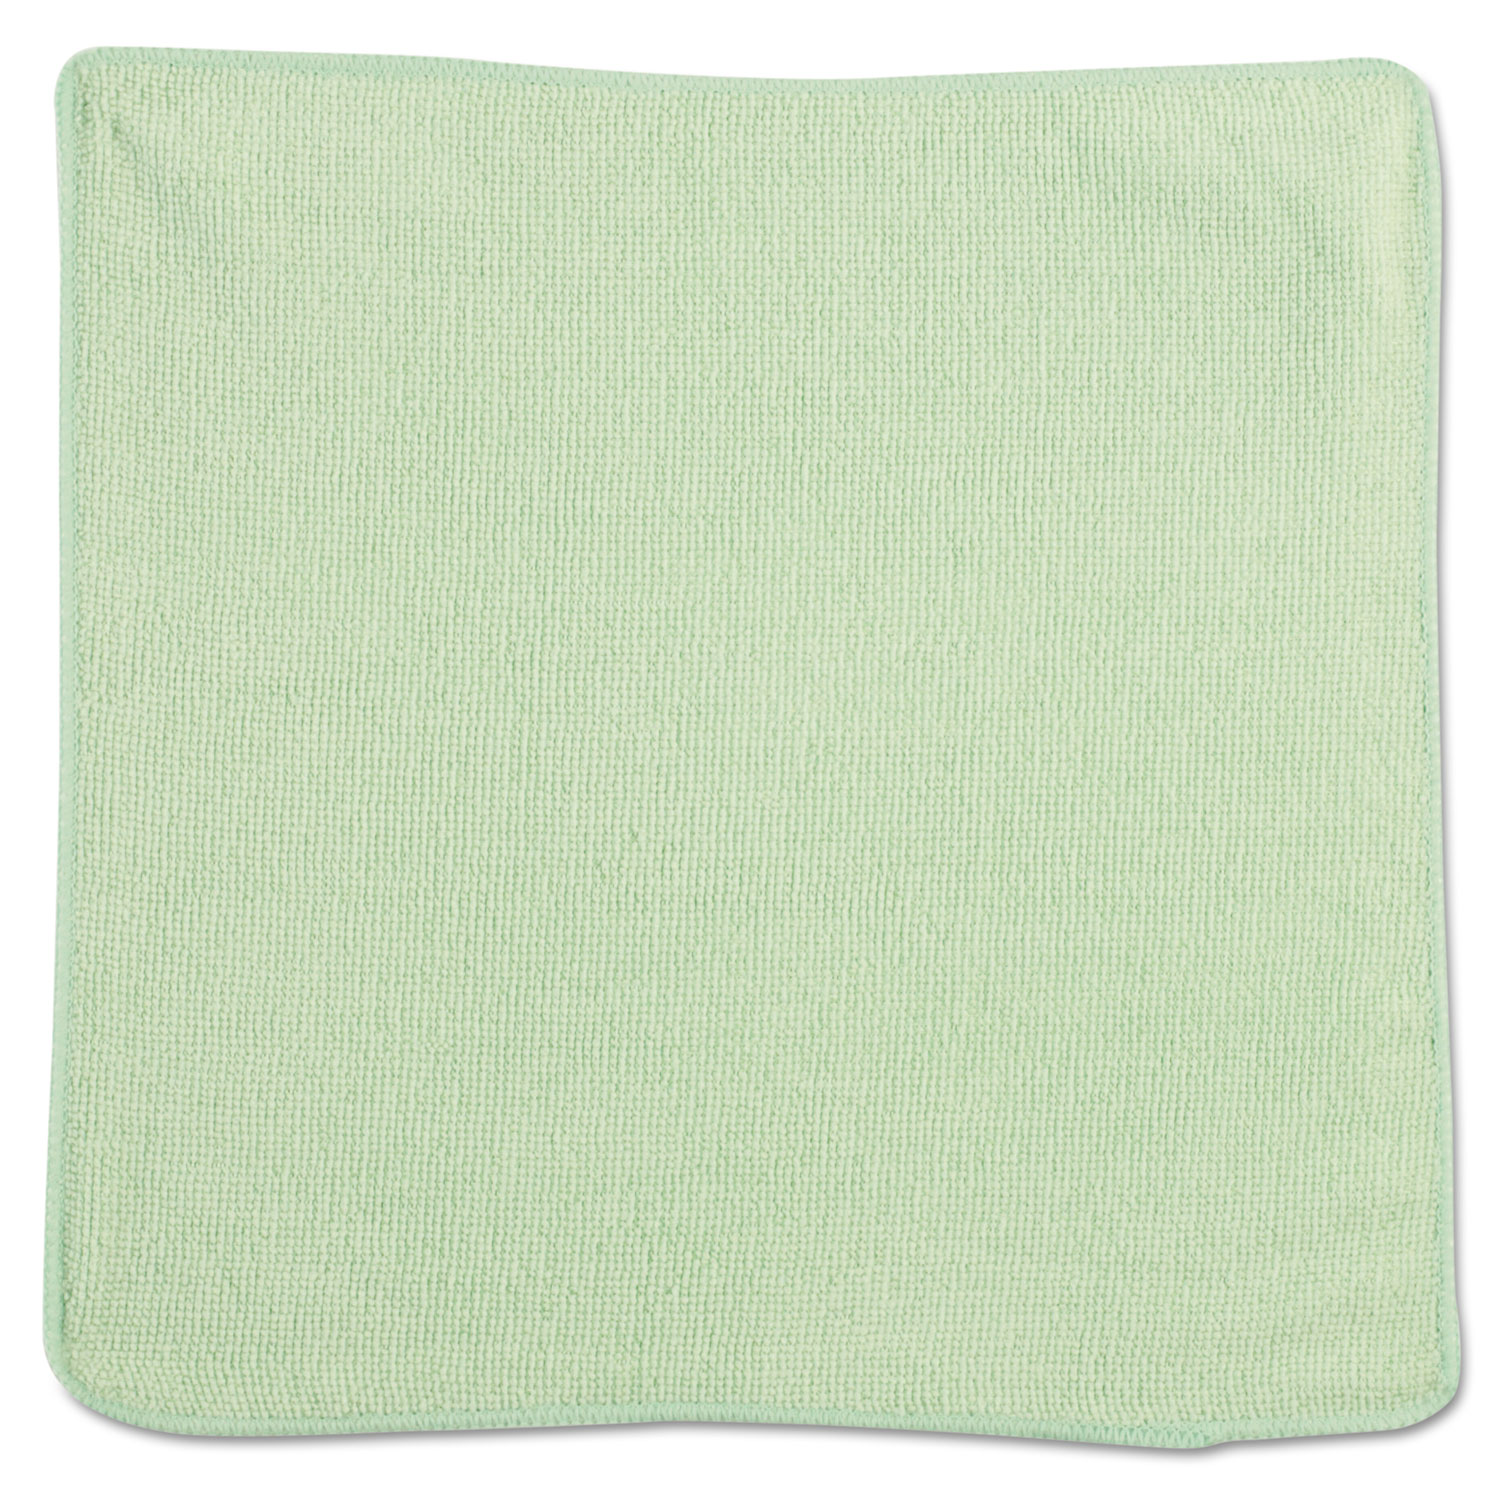  Rubbermaid Commercial 1820578 Microfiber Cleaning Cloths, 12 x 12, Green, 24/Pack (RCP1820578) 